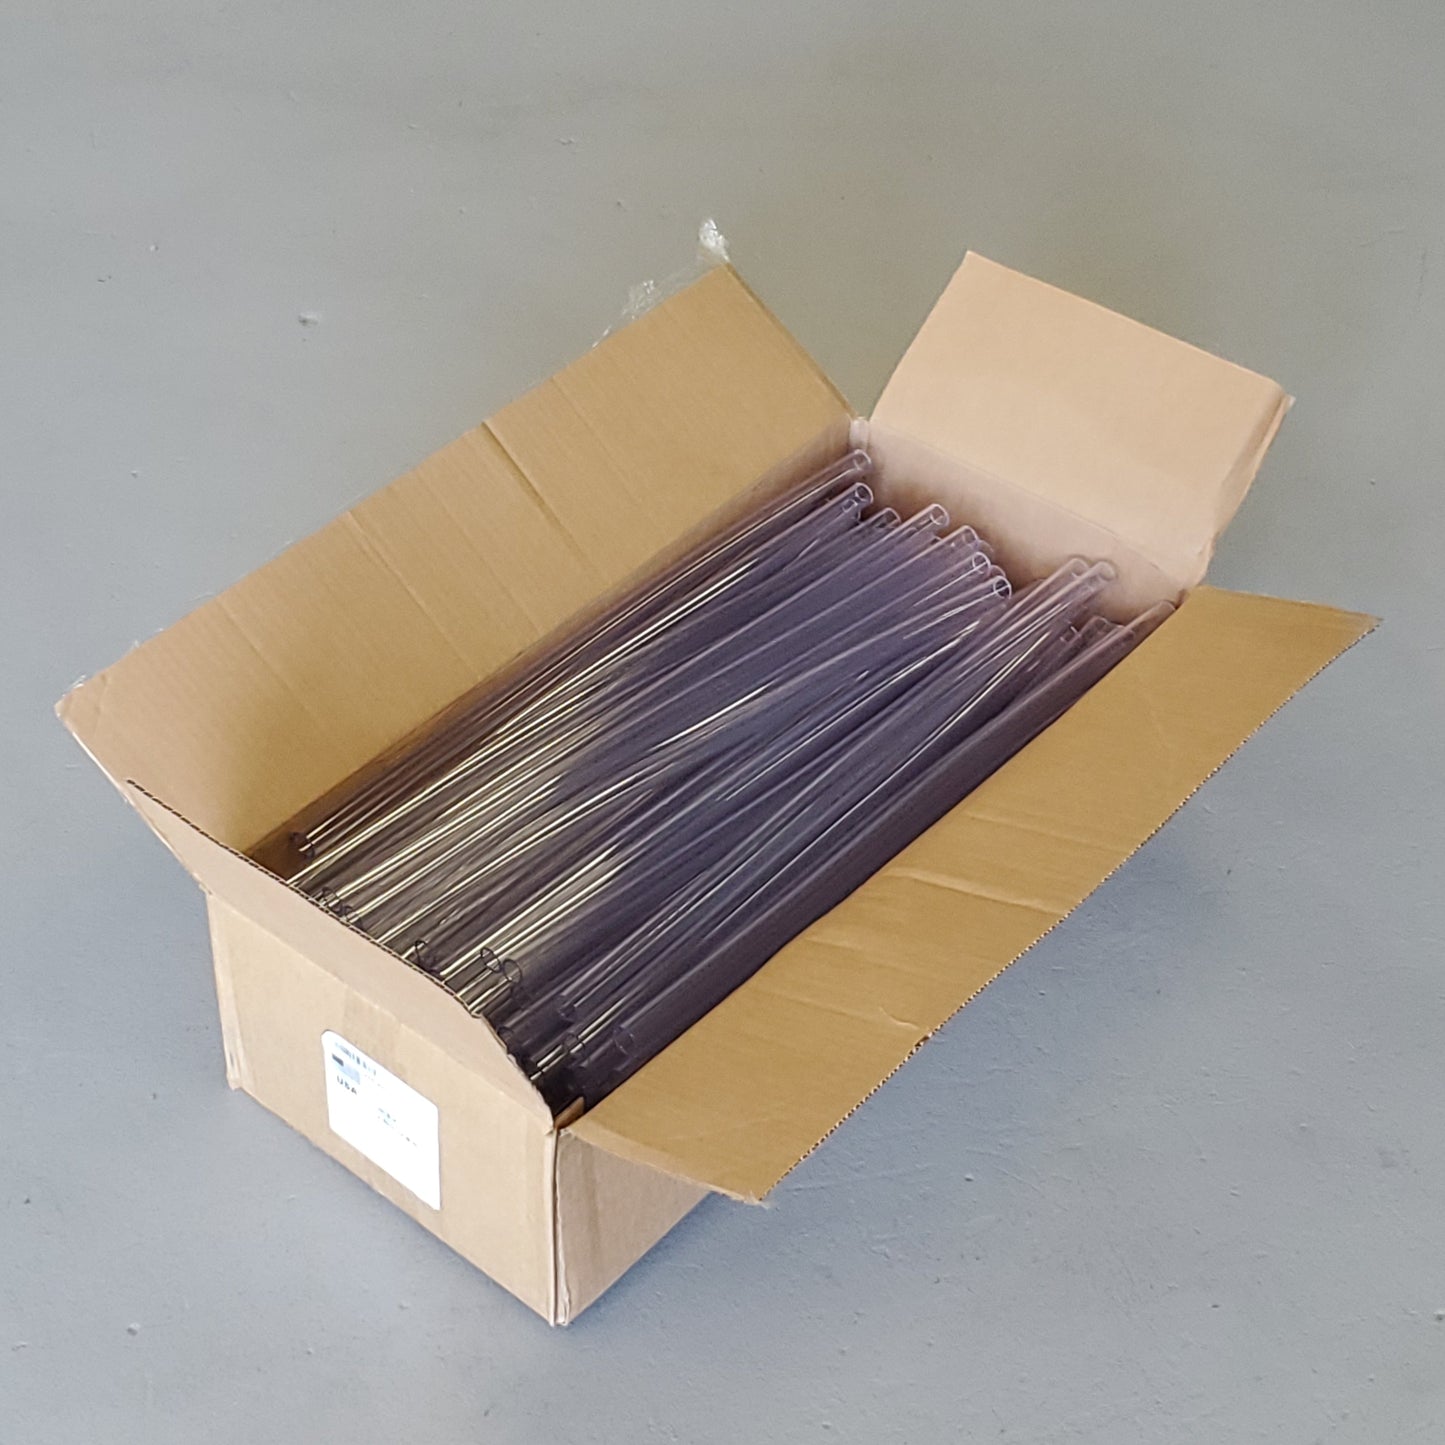 Z@ Case Of 100 PVC Clear Vinyl Tubing / Hoses .625 ID X .812 OD X 24" Long Made In USA (New) E